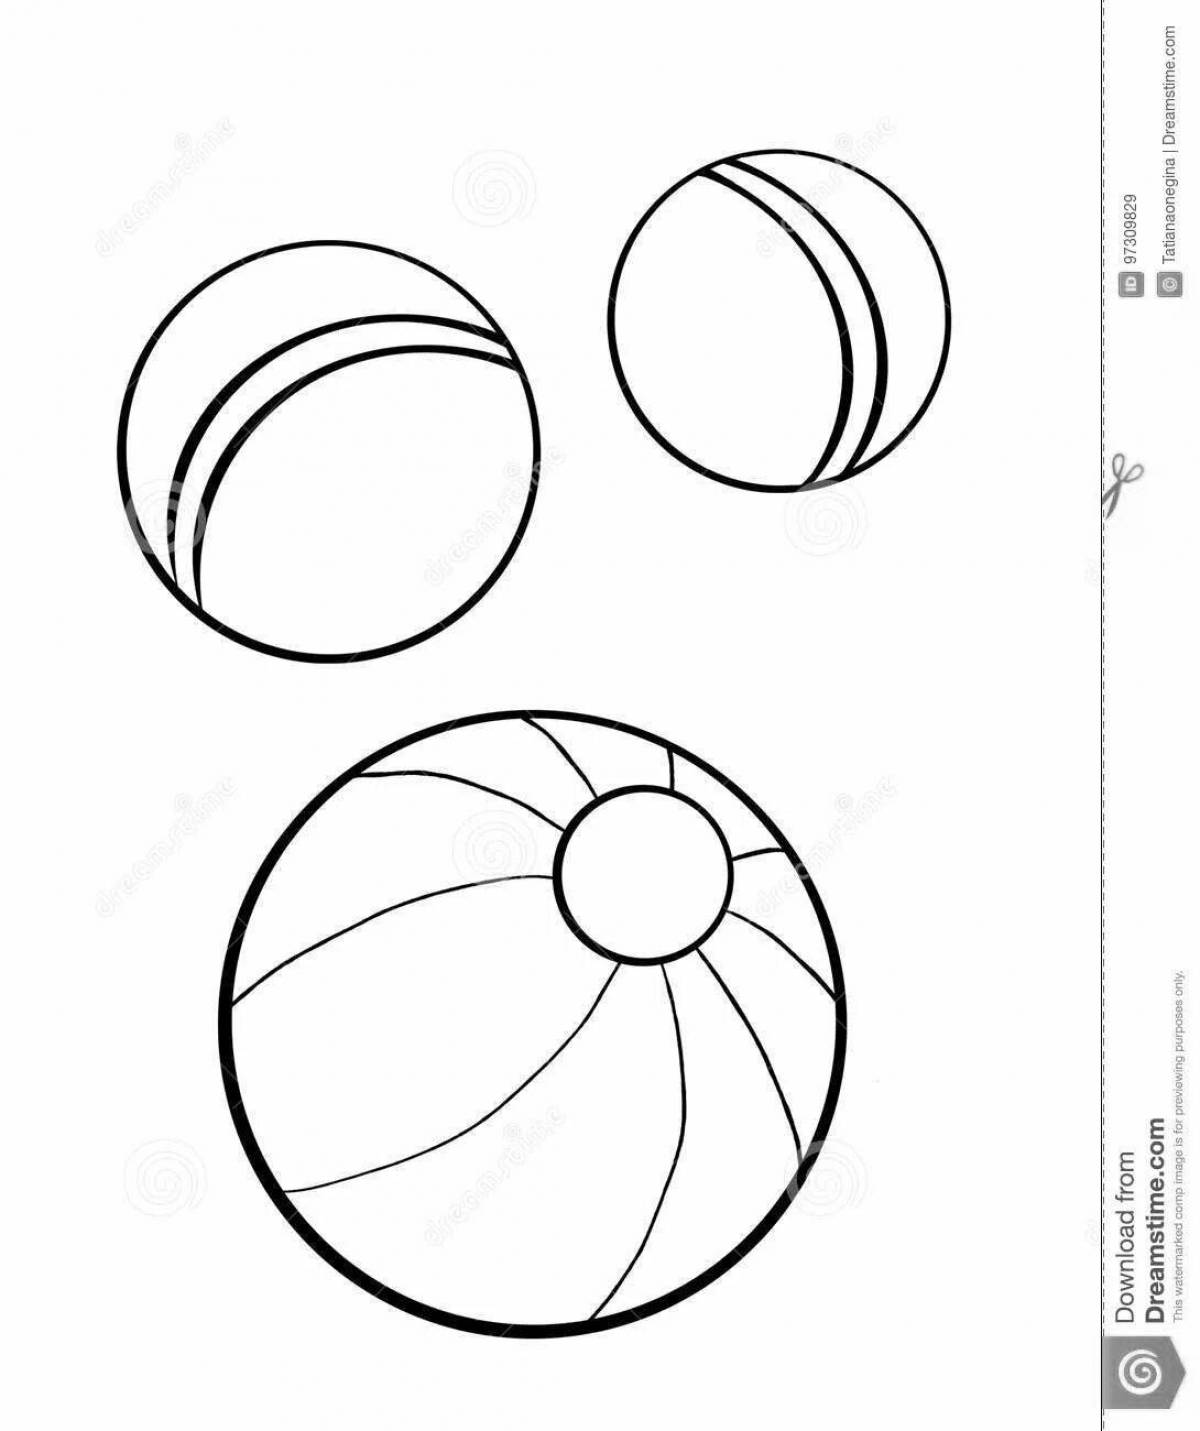 Coloring book funny ball for kids